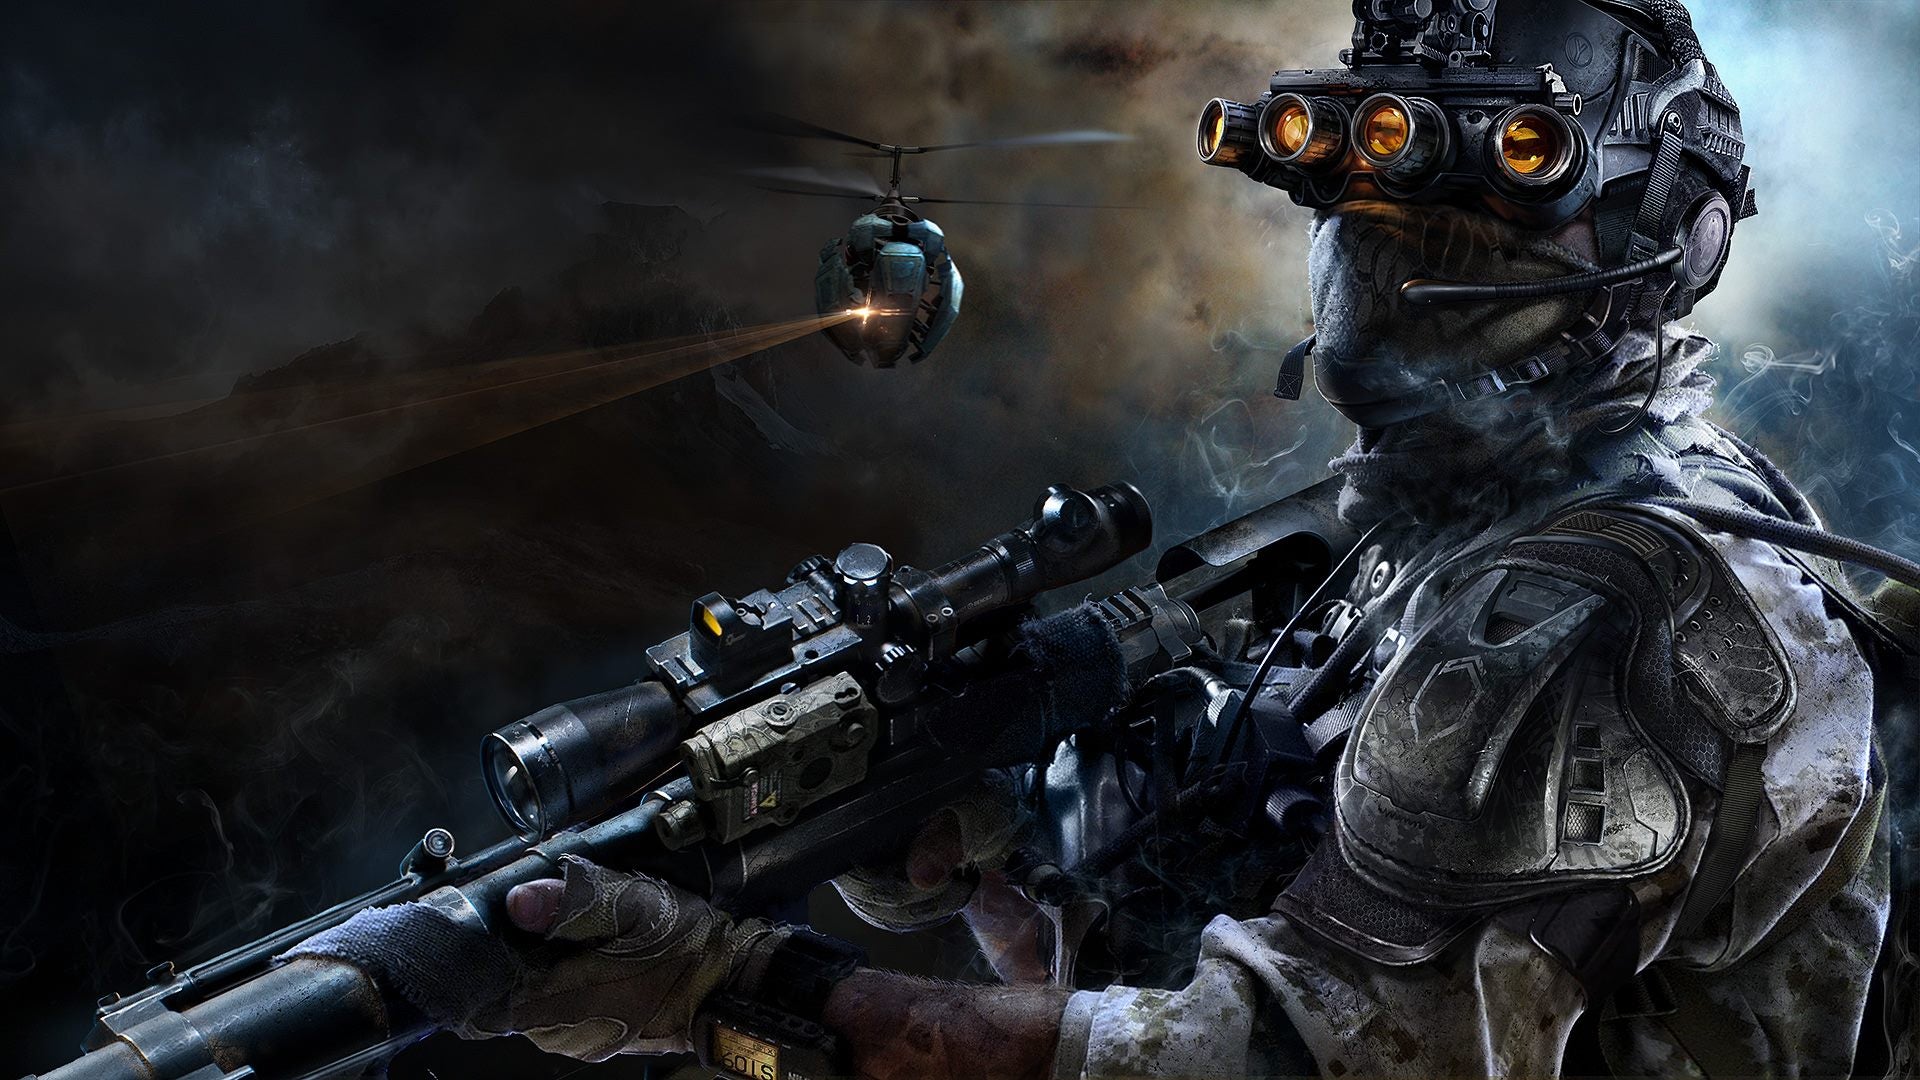 Image for Sniper Ghost Warrior 3 launches without multiplayer, so it won't "dilute" the single player experience